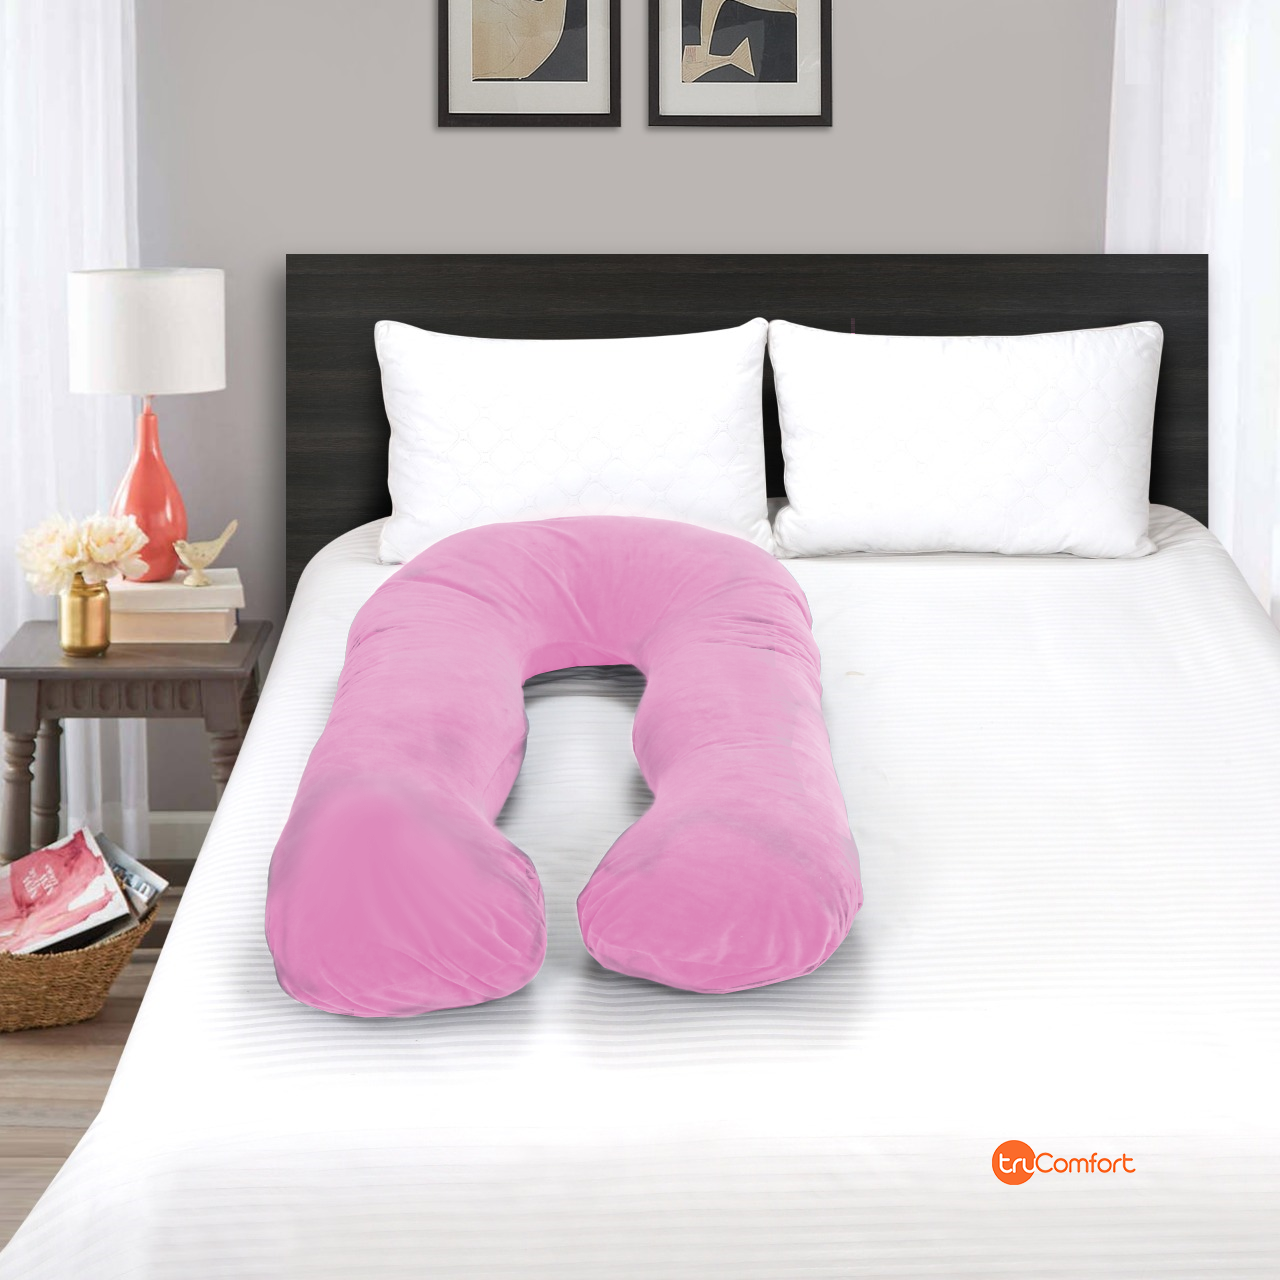 U-Shaped Pregnancy Pillow With Velvet Cover - trucomfort.in